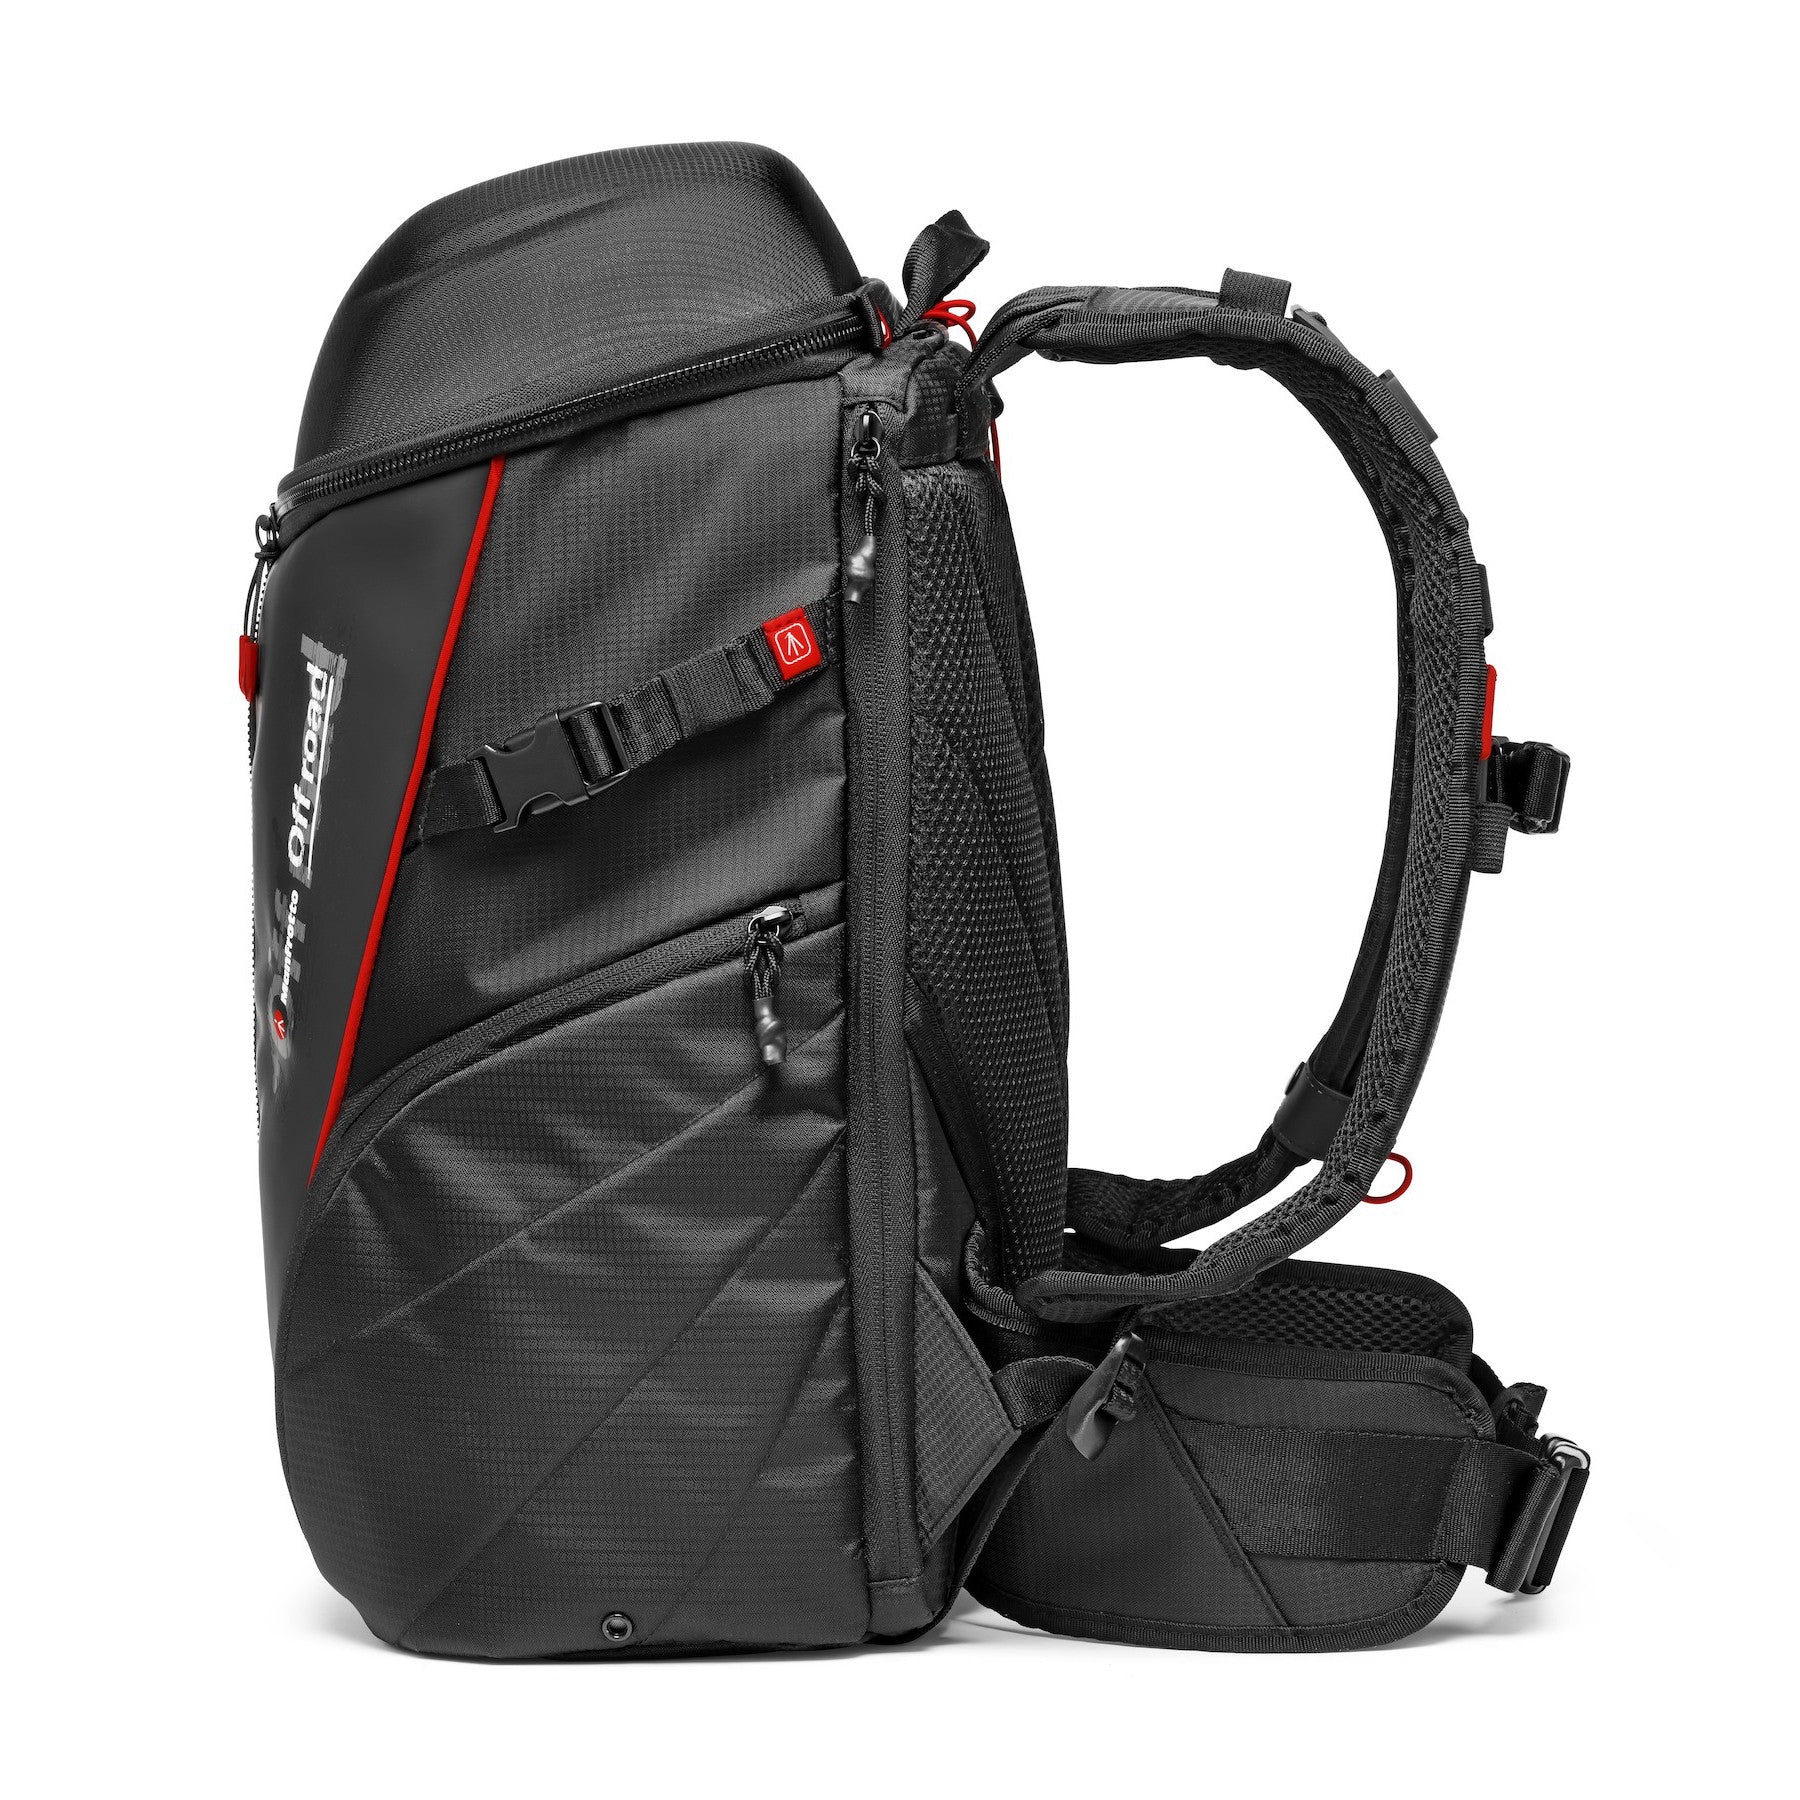 Manfrotto Off Road Stunt Backpack (Black), bags backpacks, Manfrotto - Pictureline  - 3